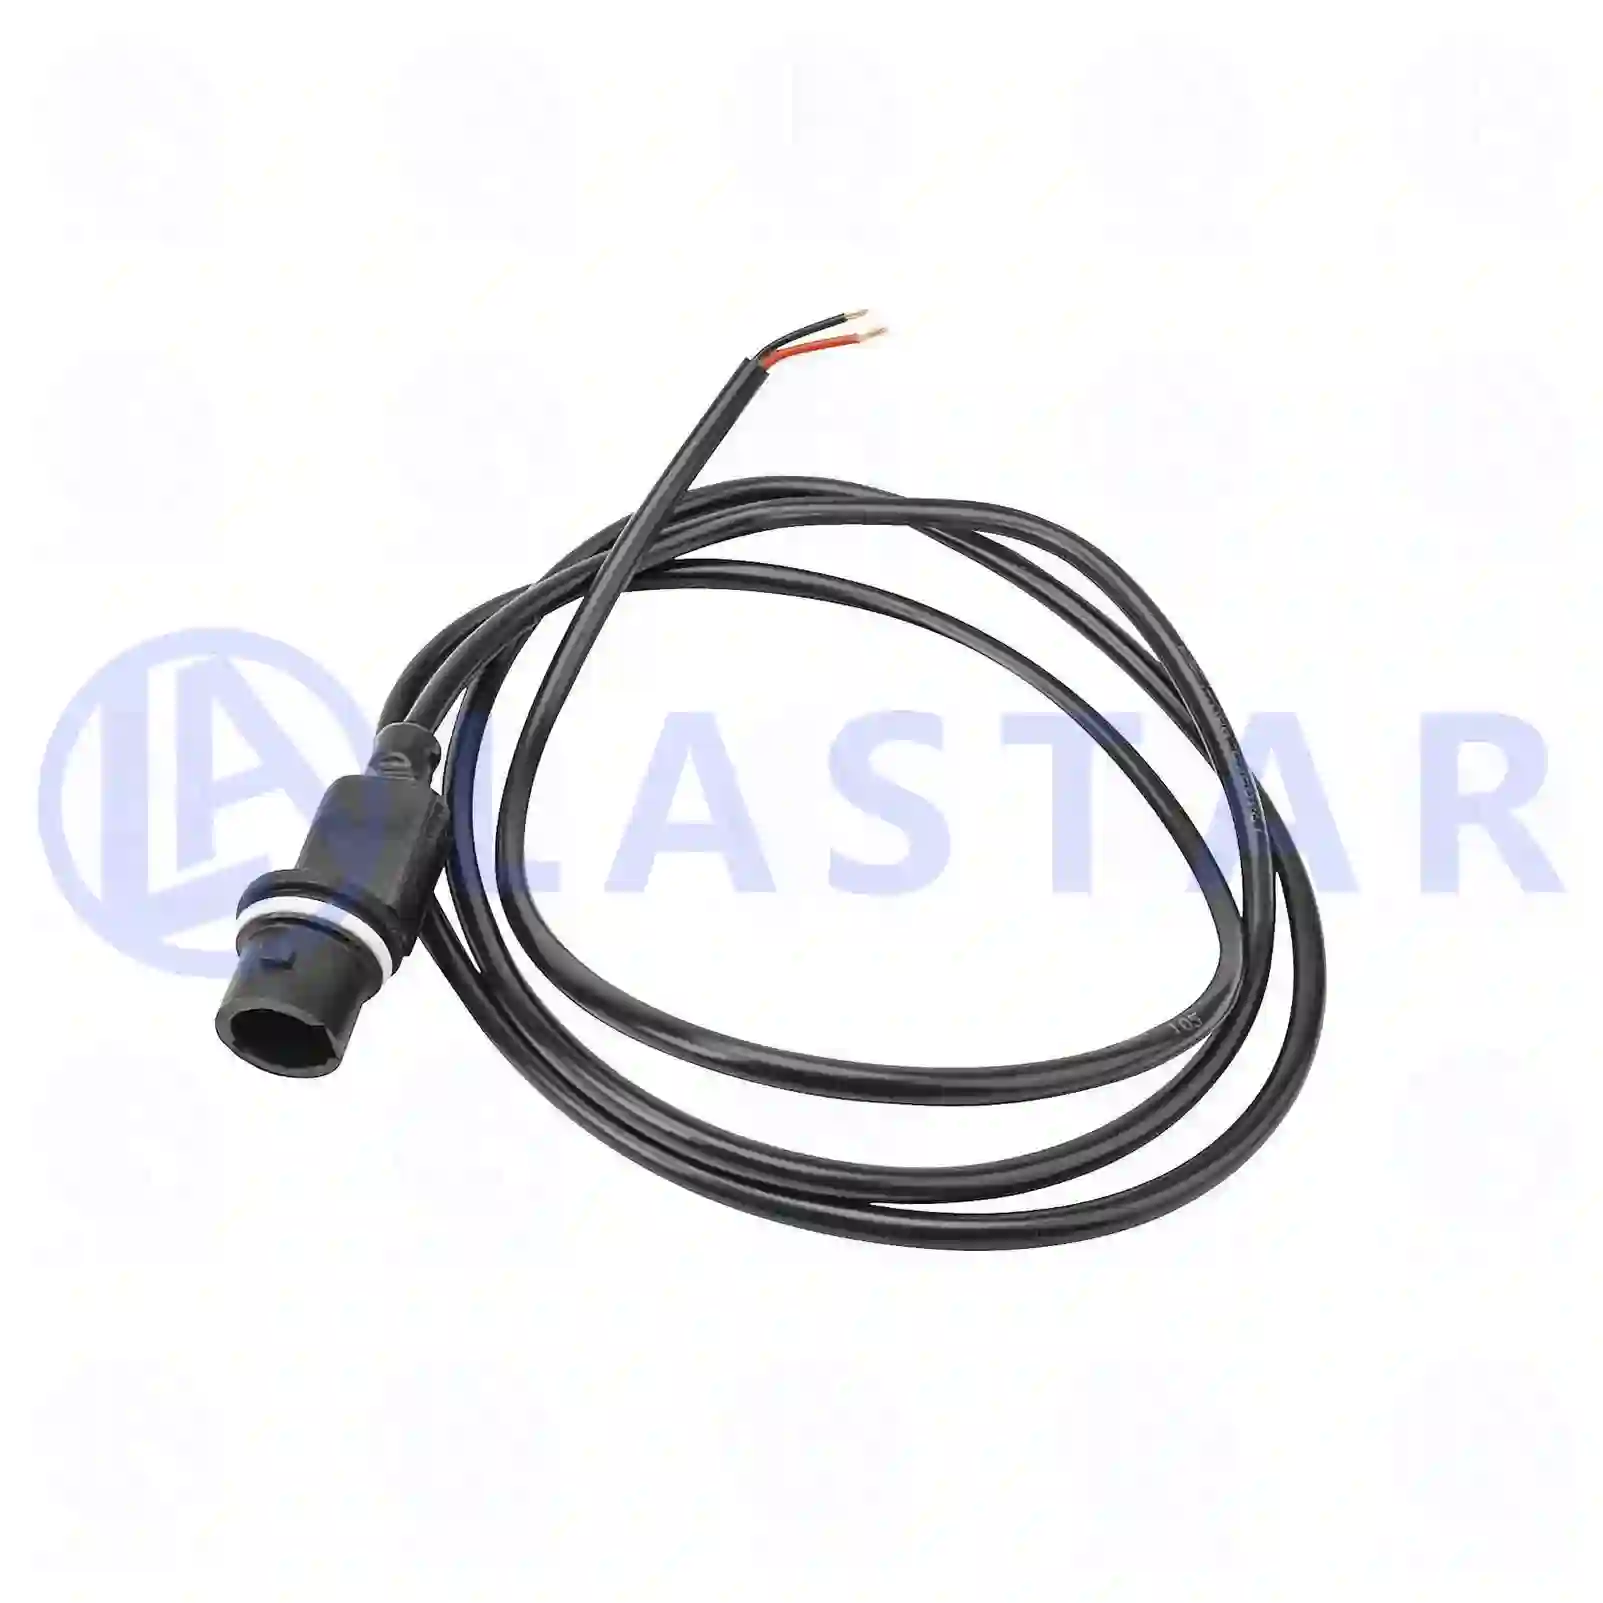 Lamp socket, with cable, 77713332, 1367627, 1794512, ZG20609-0008 ||  77713332 Lastar Spare Part | Truck Spare Parts, Auotomotive Spare Parts Lamp socket, with cable, 77713332, 1367627, 1794512, ZG20609-0008 ||  77713332 Lastar Spare Part | Truck Spare Parts, Auotomotive Spare Parts